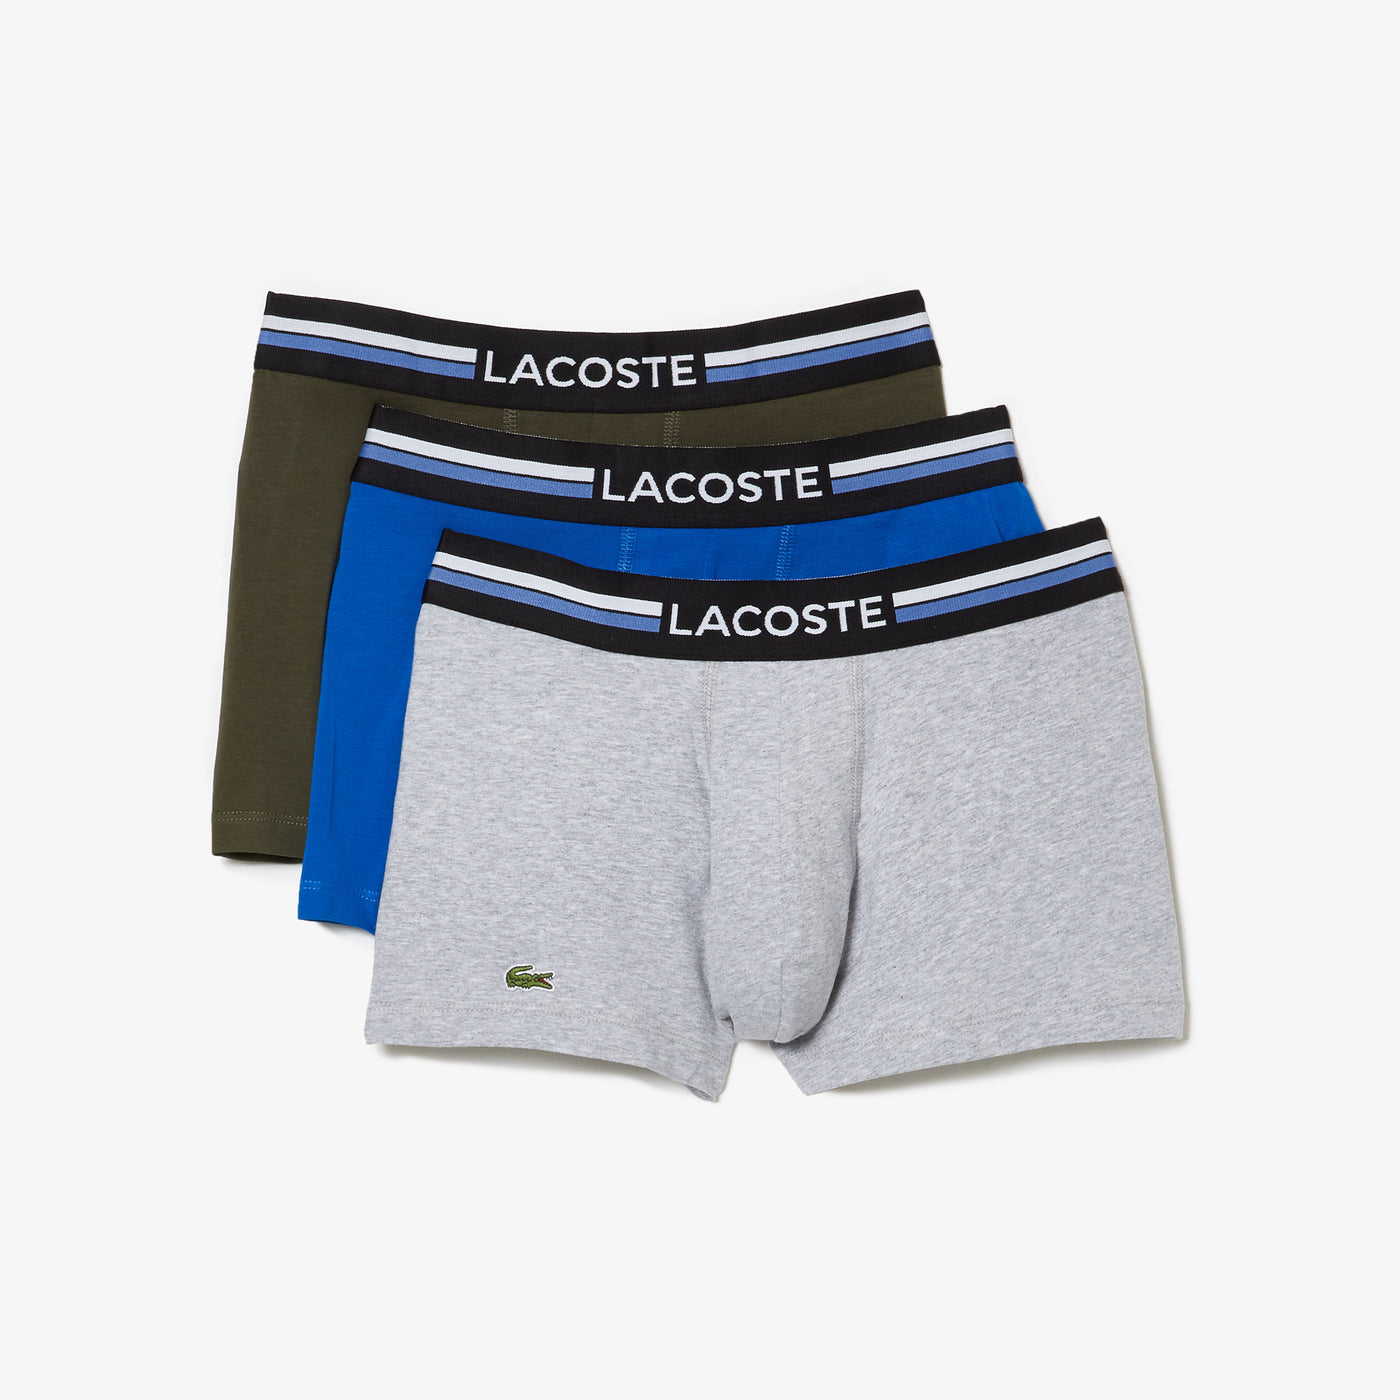 Shop The Latest Collection Of Lacoste Pack Of 3 Iconic Trunks With Three-Tone Waistband - 5H3386 In Lebanon